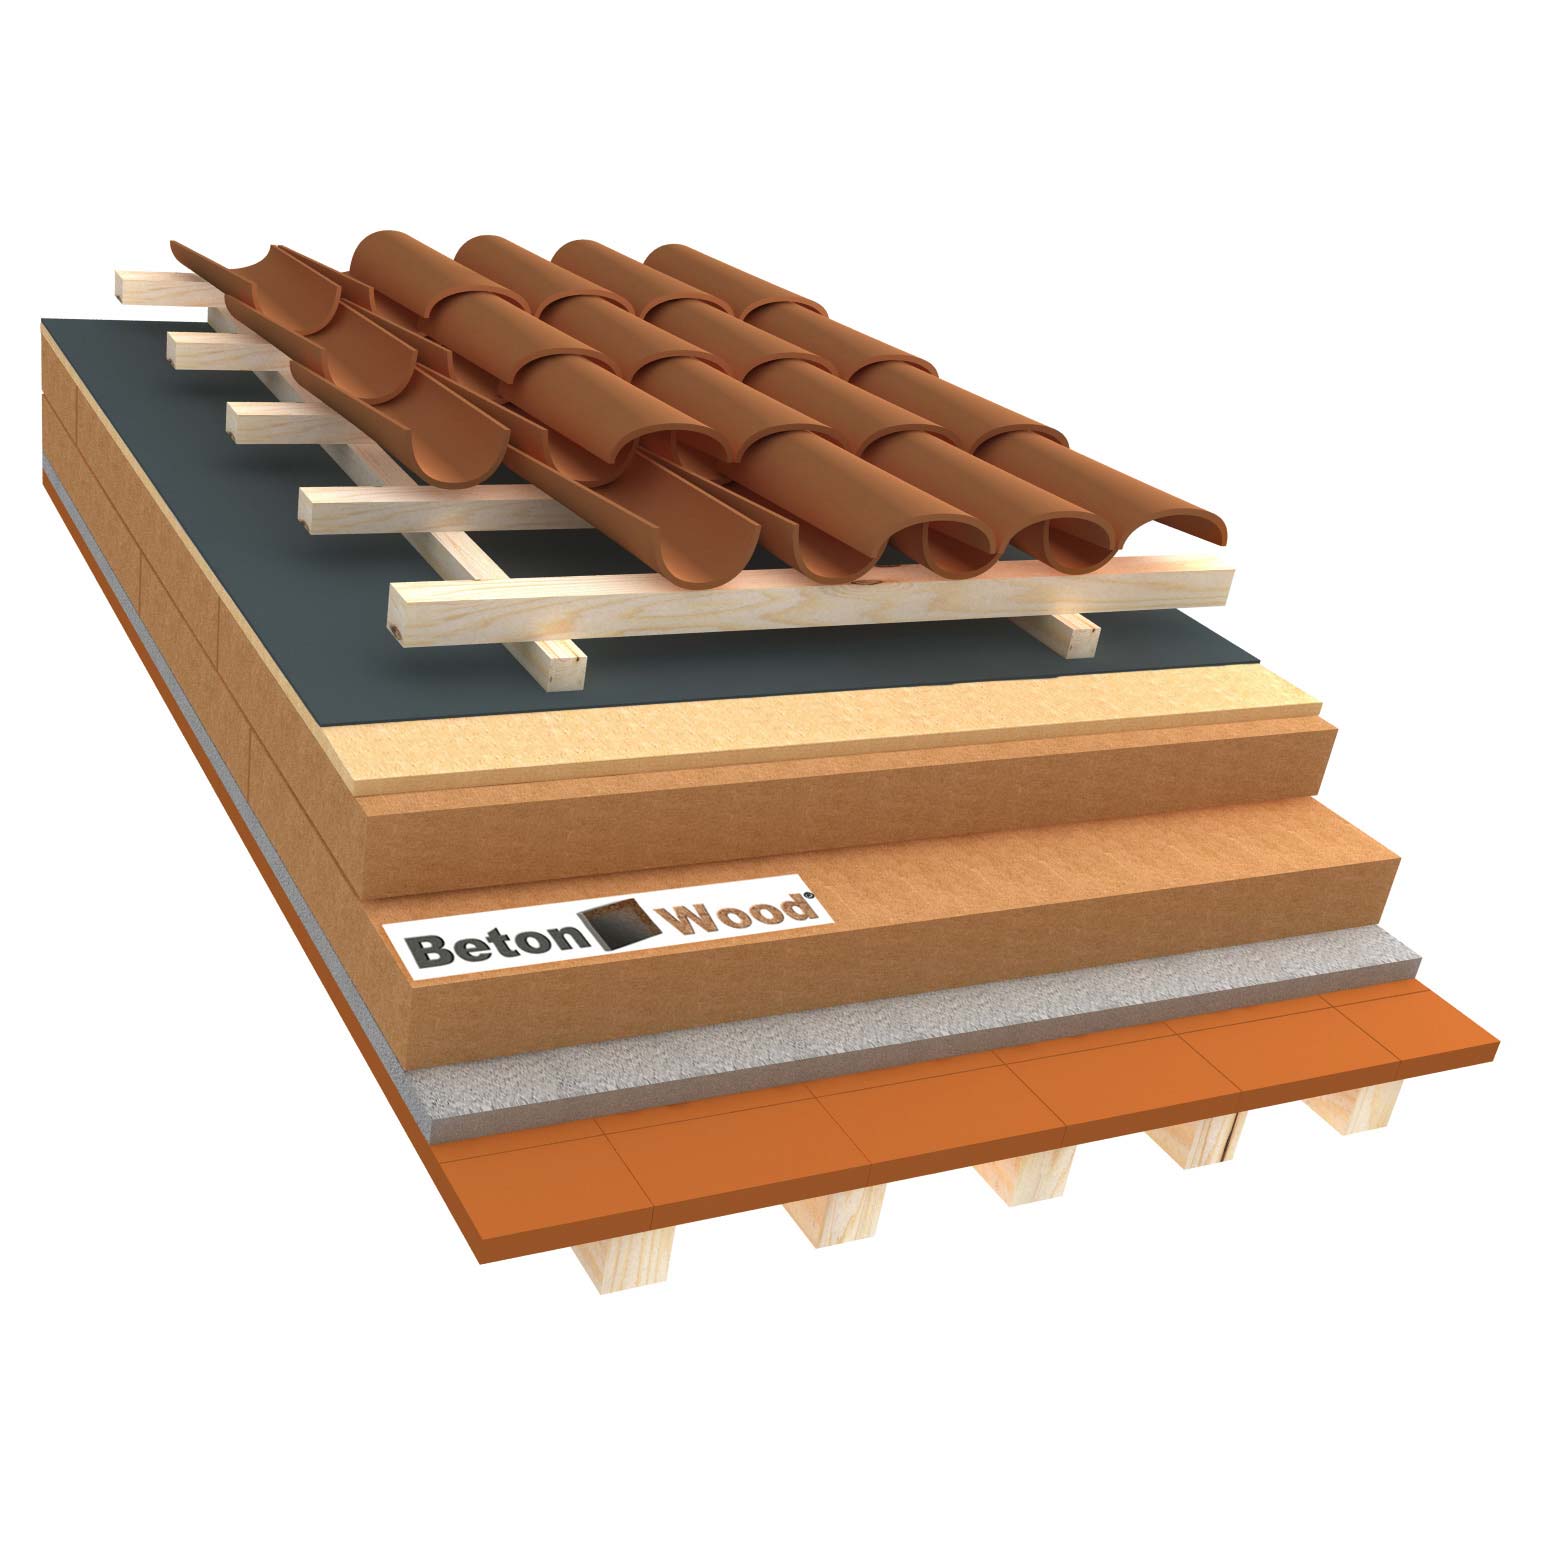 Ventilated roof with fiber wood Isorel and Therm on terracotta tiles